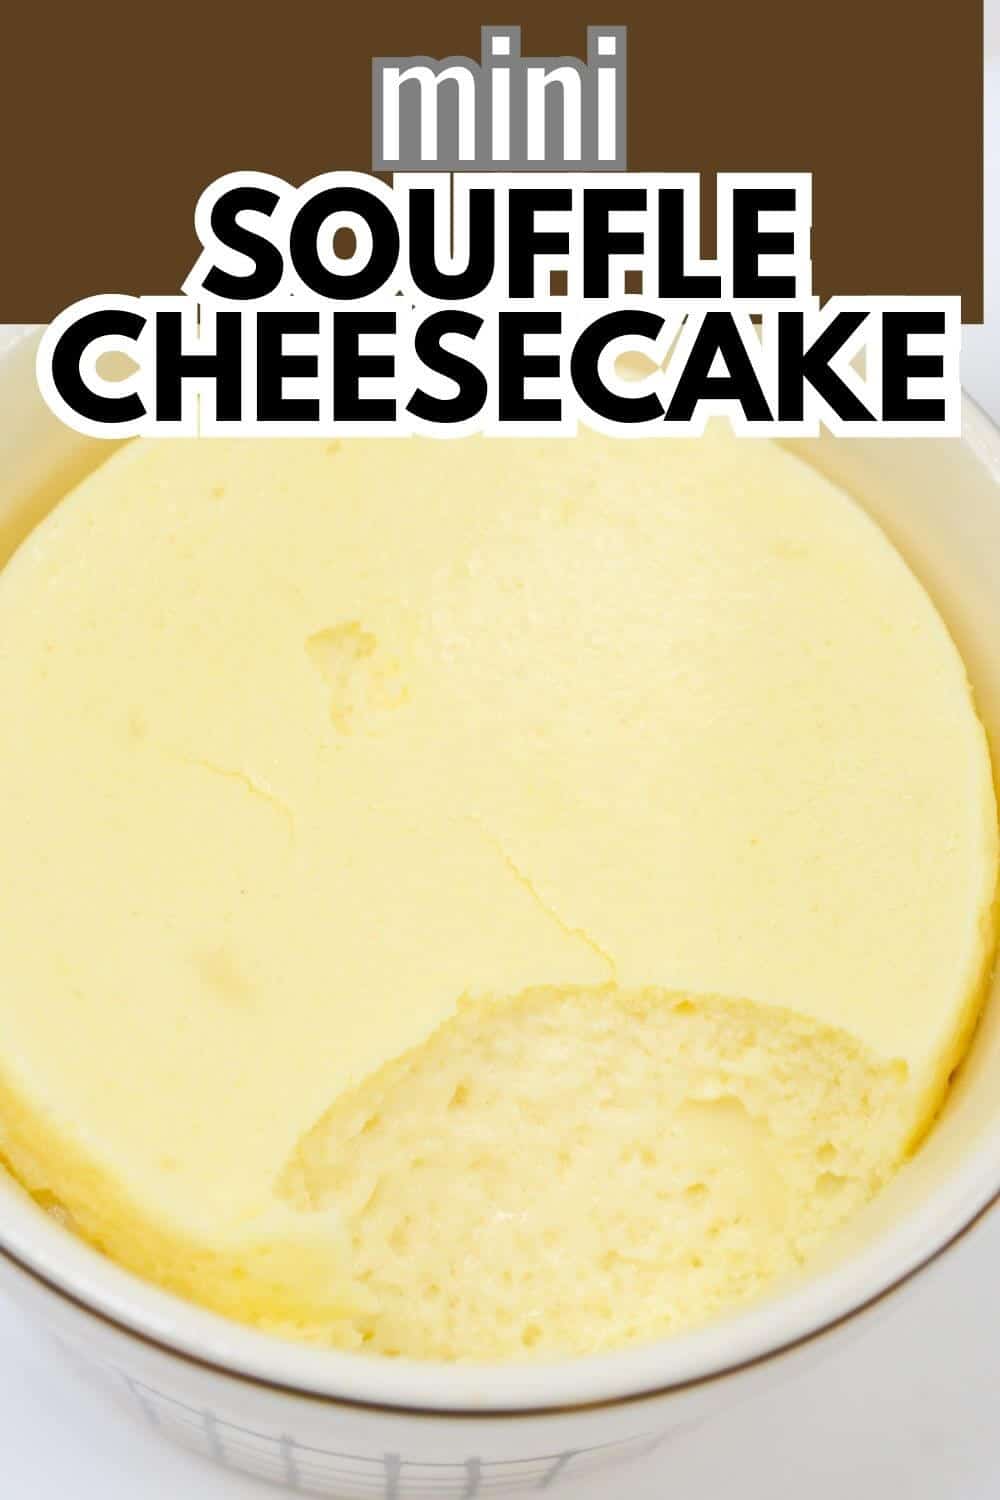 Mini souffle cheesecake image with text.